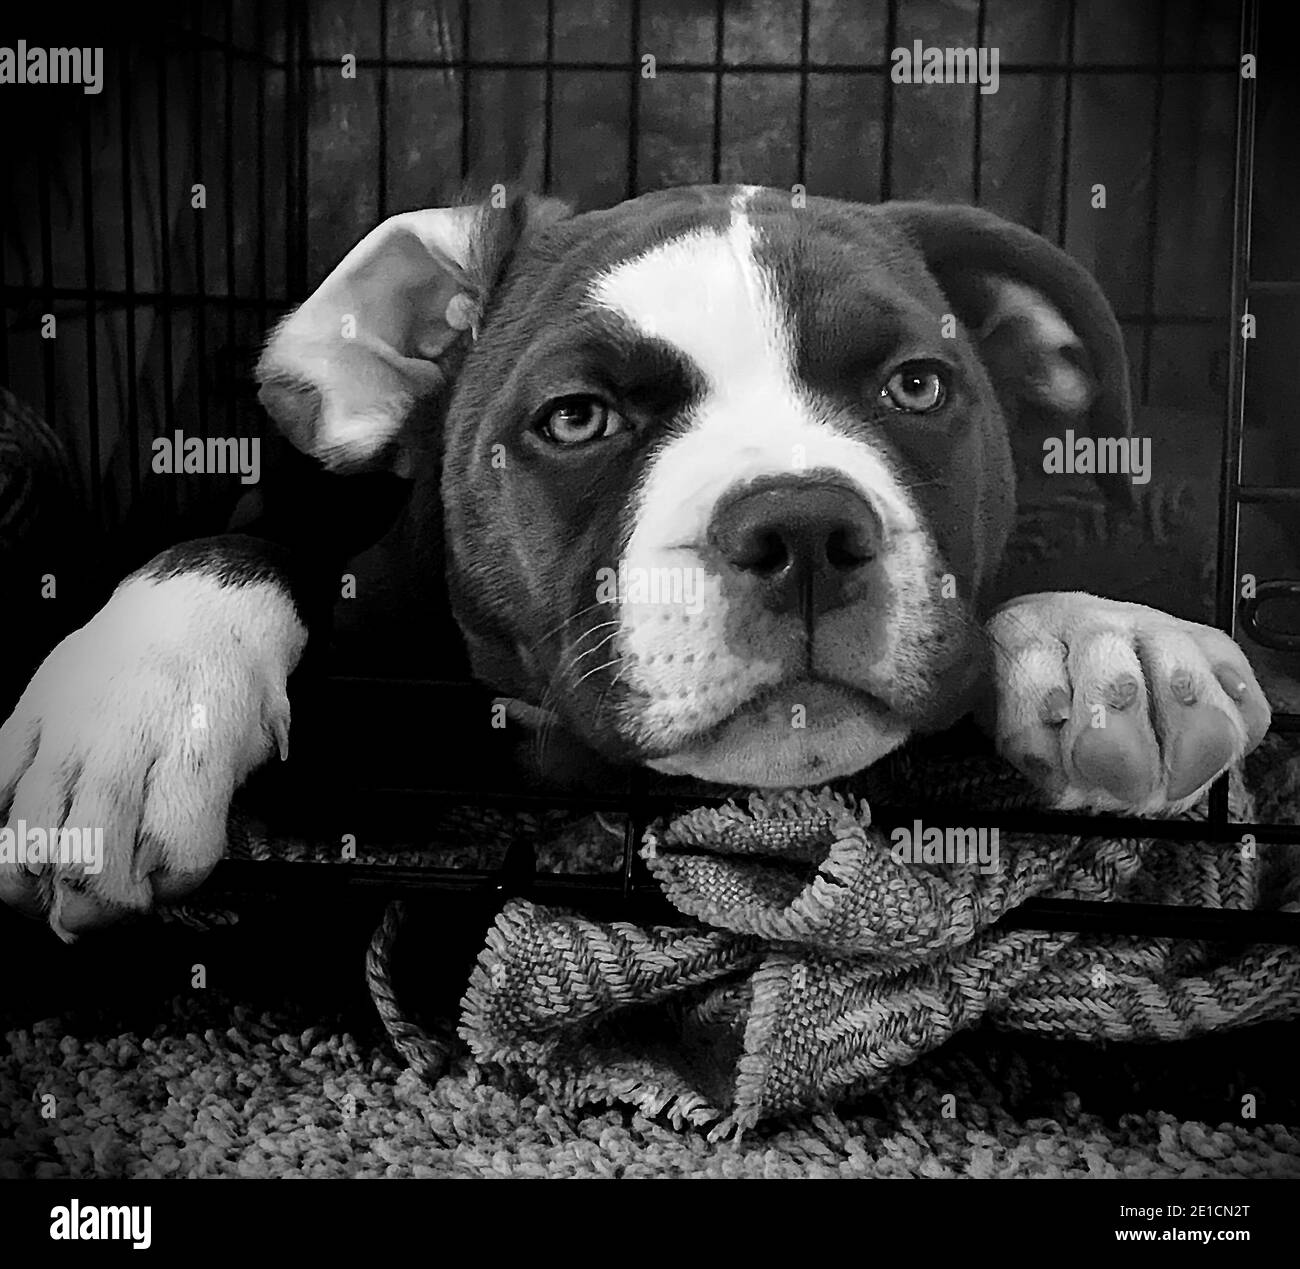 Cute american bulldog puppy Black and White Stock Photos & Images - Alamy